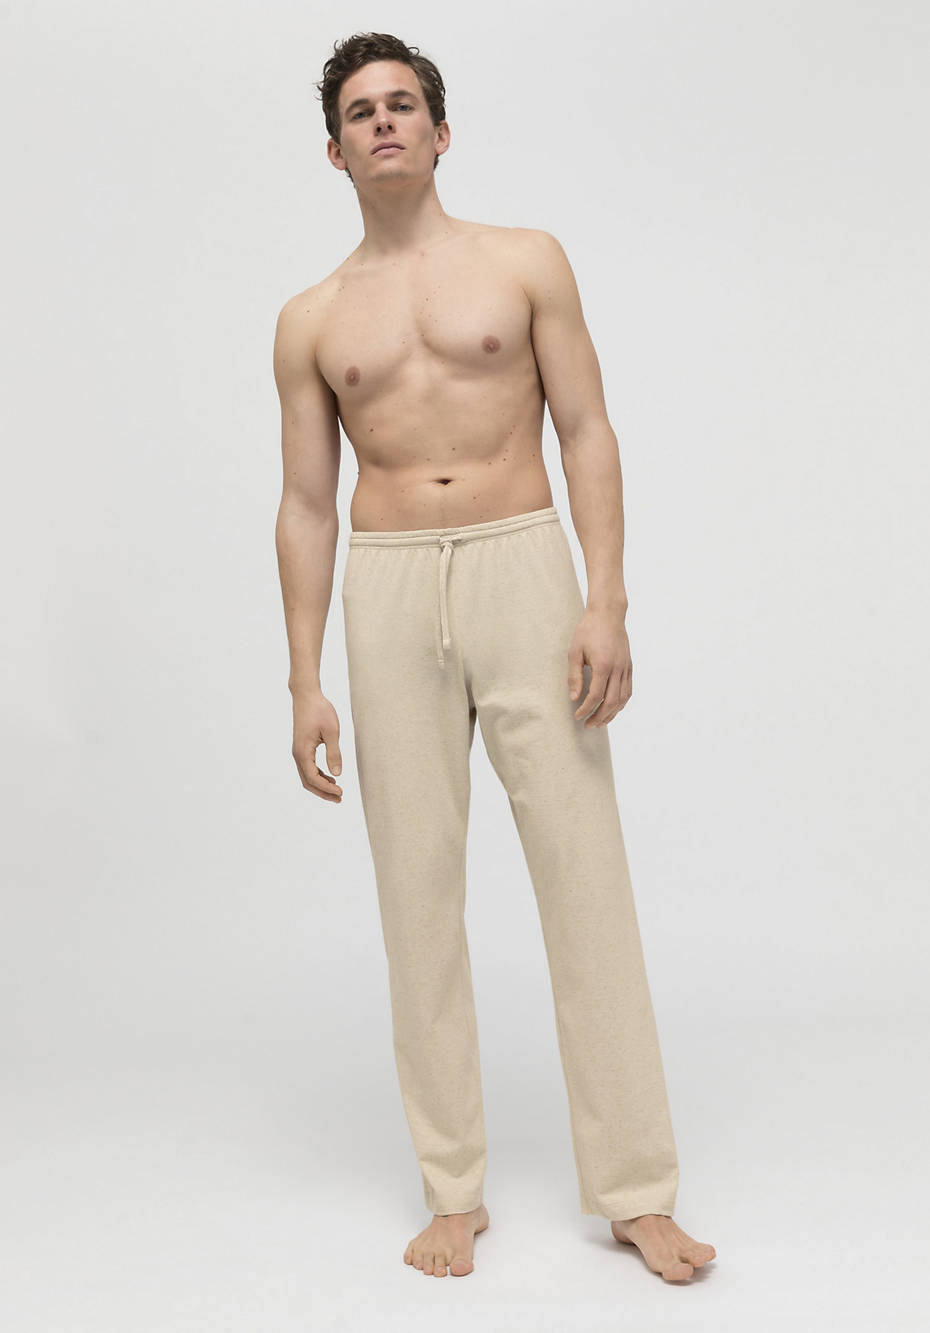 Sleep trousers made of organic cotton with linen